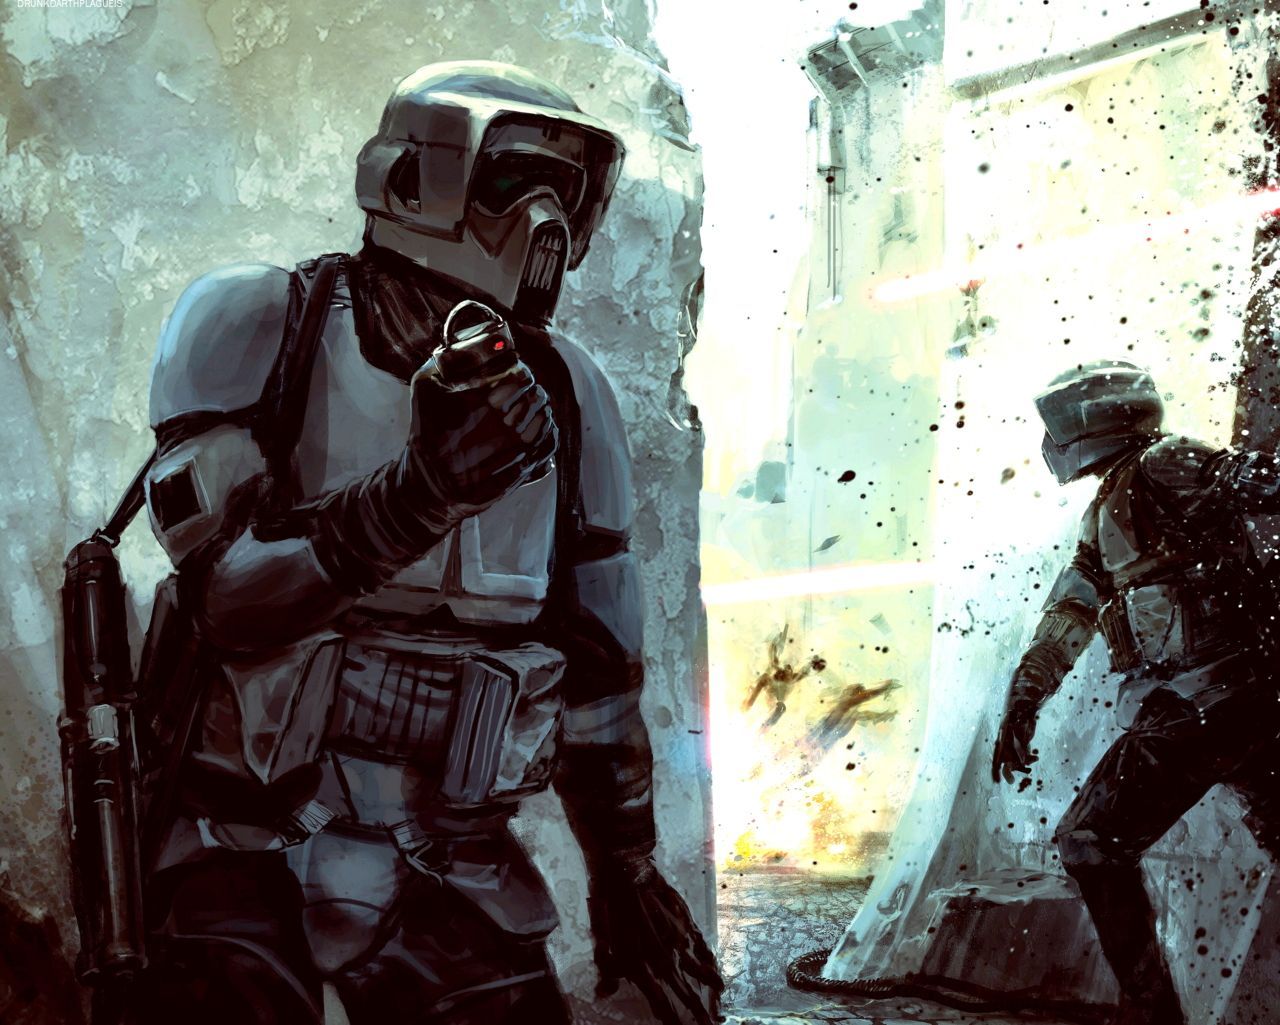 Scout troopers in action. Star wars wallpaper, Star wars art, Star wars empire